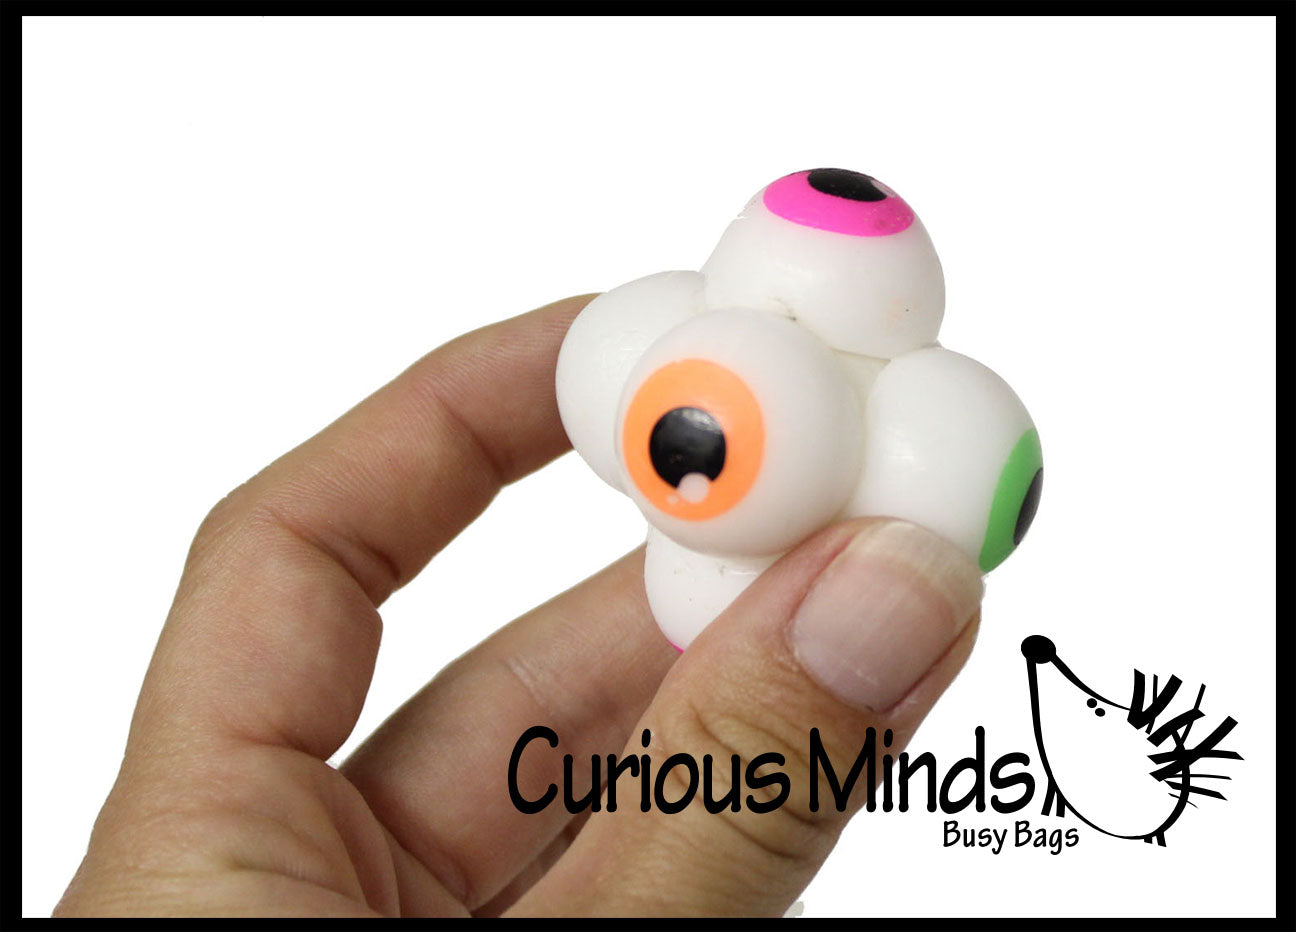 LAST CHANCE - LIMITED STOCK  - SALE - Eyeball Bouncy Balls - Toys for Ophthalmologists Optometrists Doctors Bulk Small Novelty Toy Prize Assortment Halloween Party Gifts